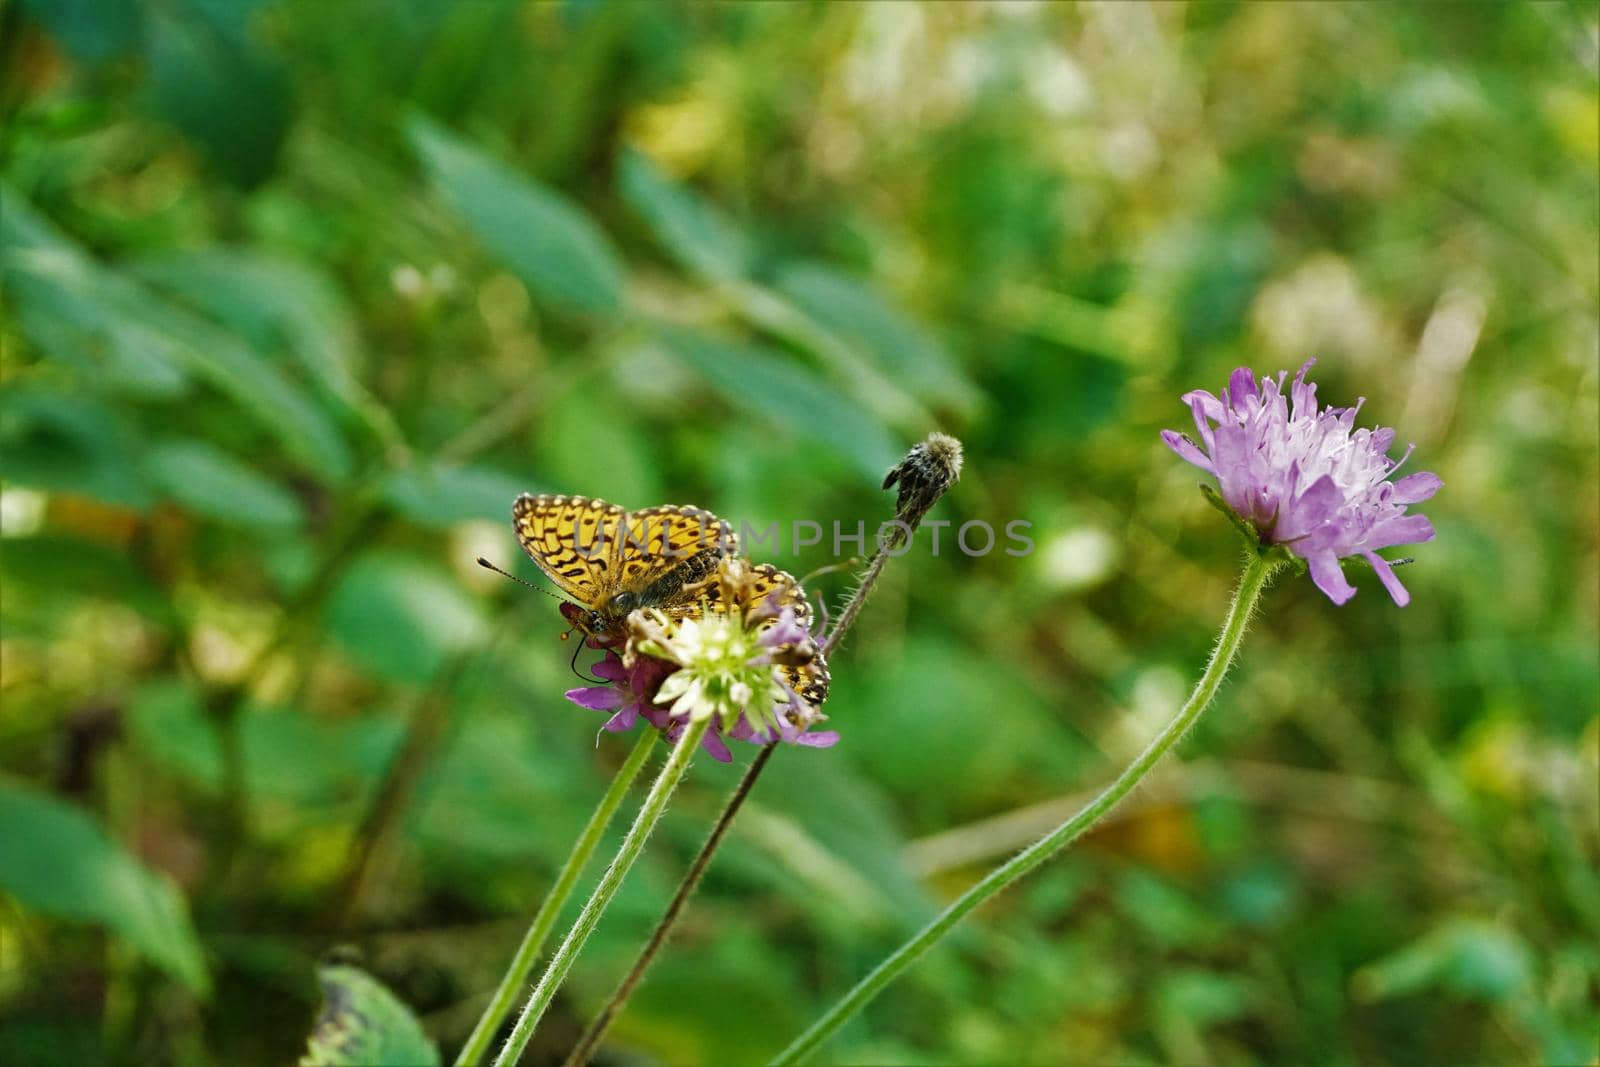 Silver-washed fritillary butterflies spotted on scabiosa blossom